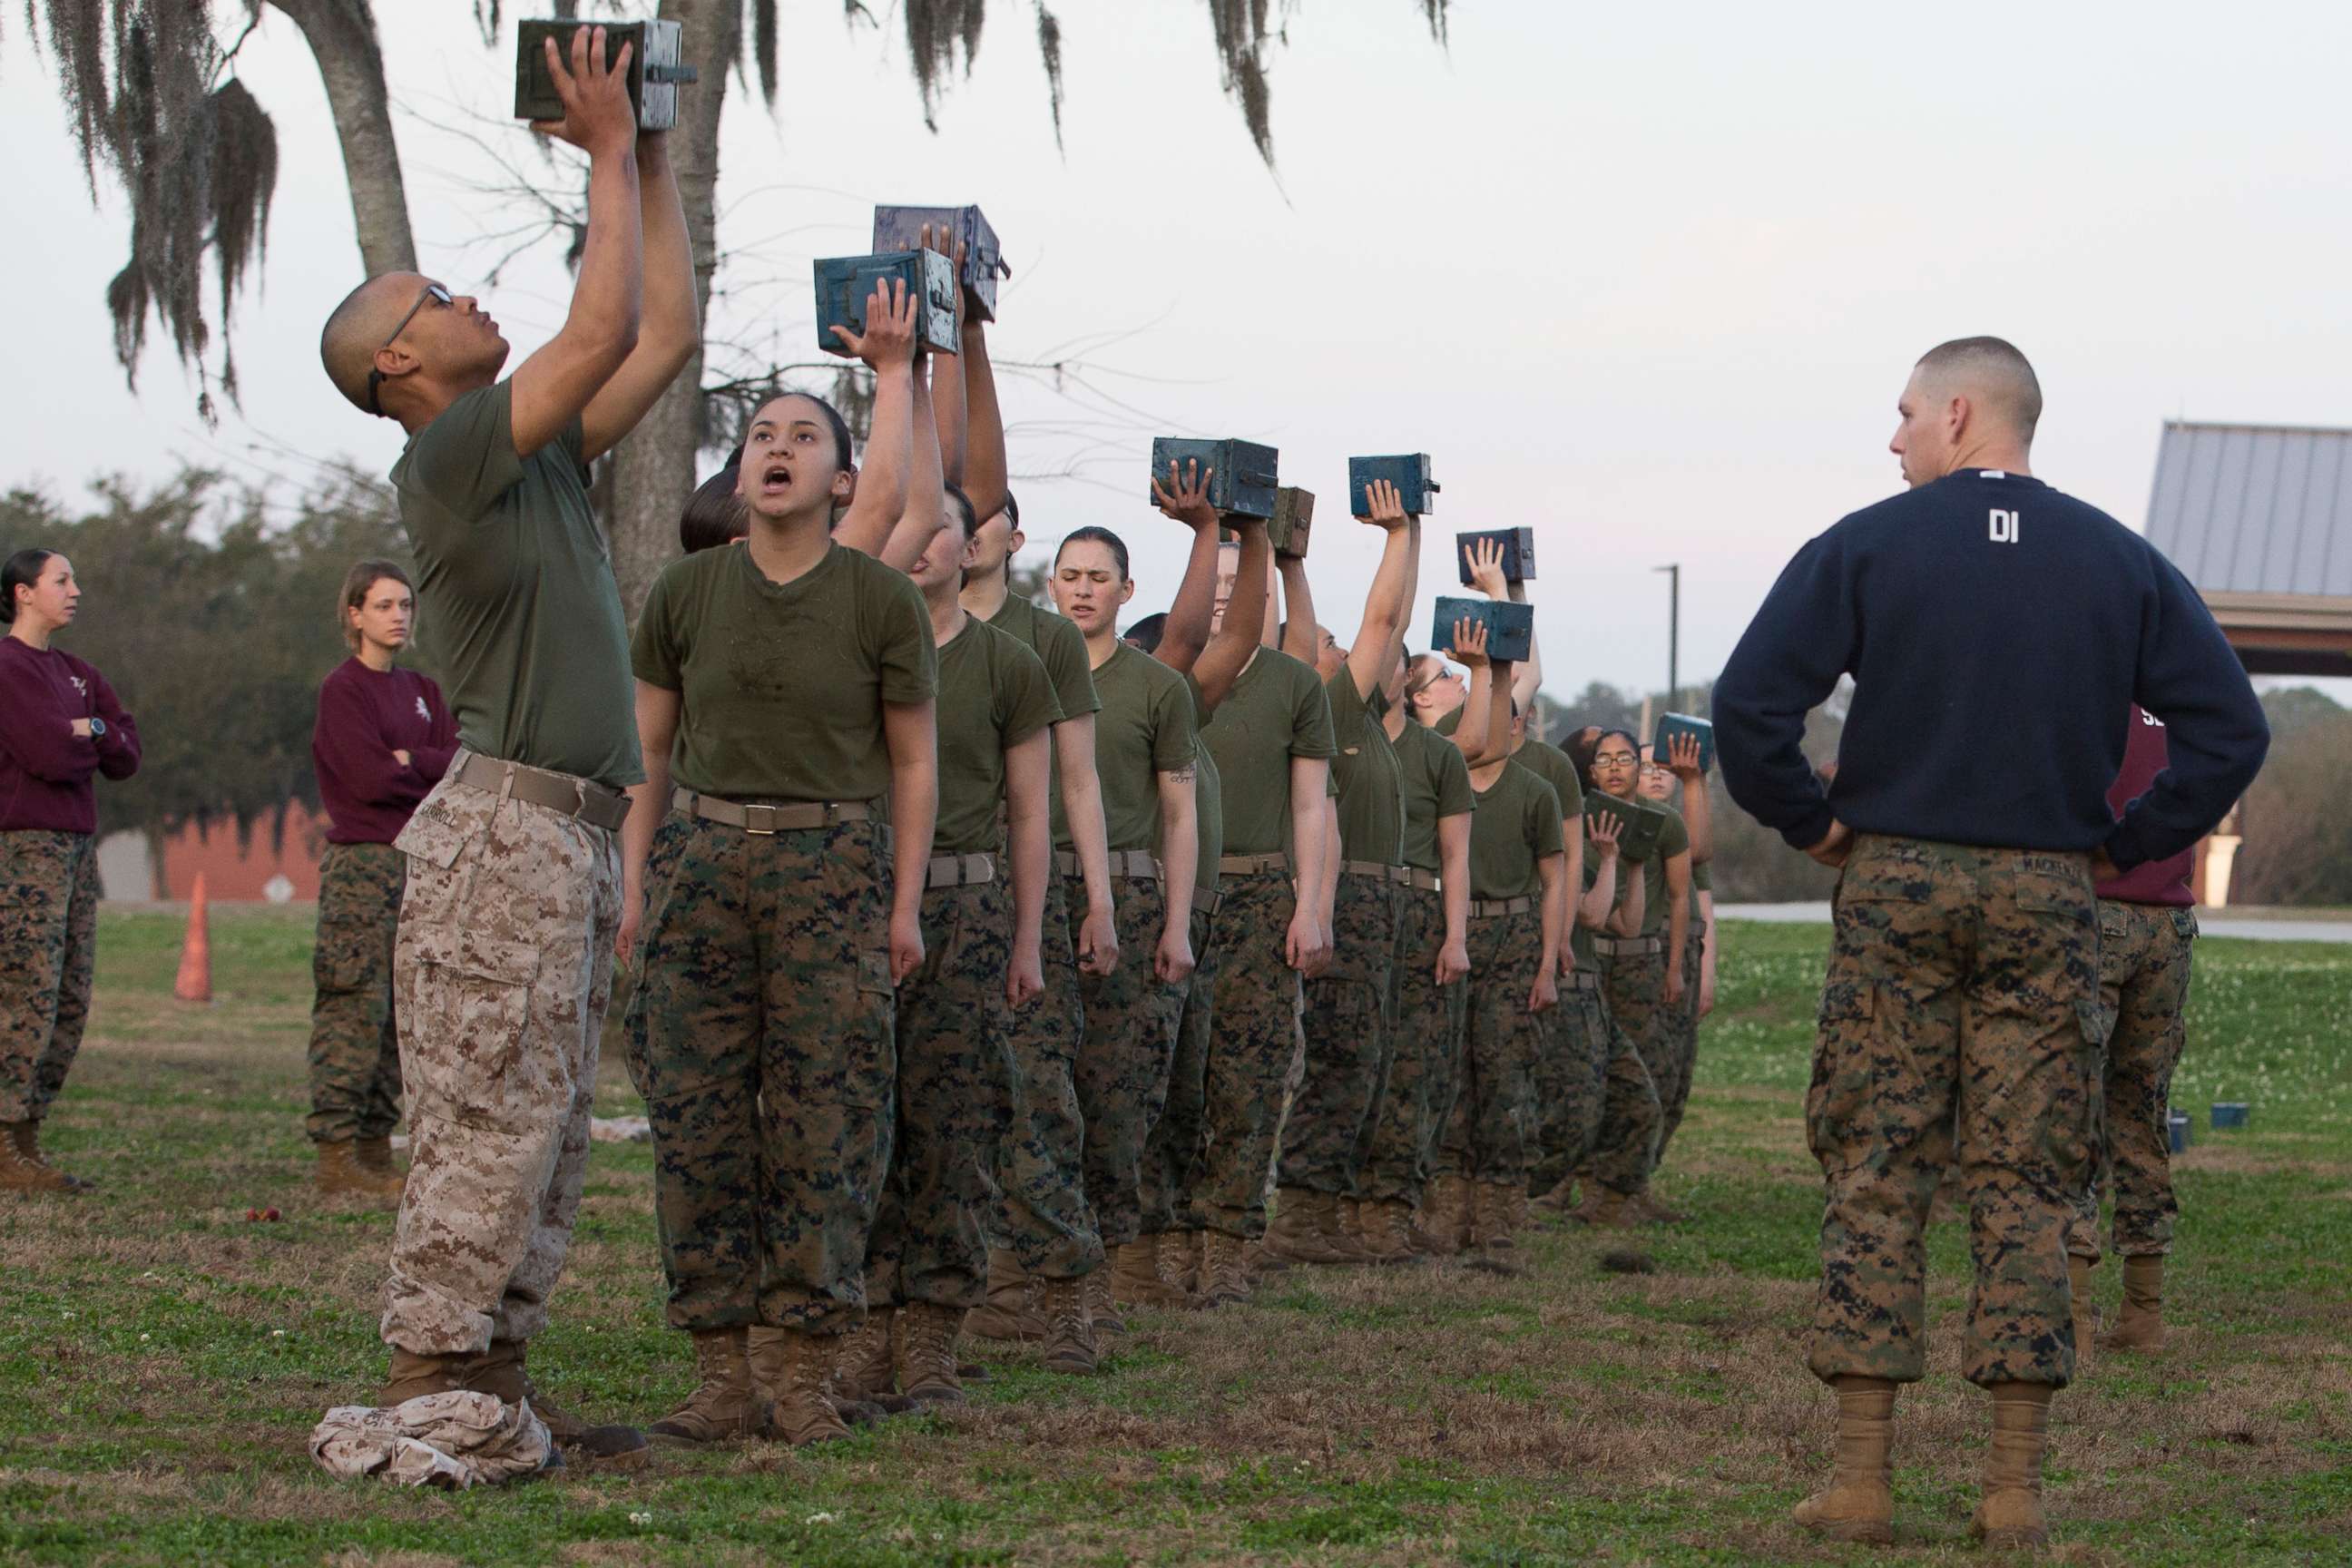 PHOTO: Marine Corps Recruits lift ammunition cans during the Combat Fitness Test on Marine Corps Recruit Depot, Parris Island, S.C., Feb. 15, 2018.